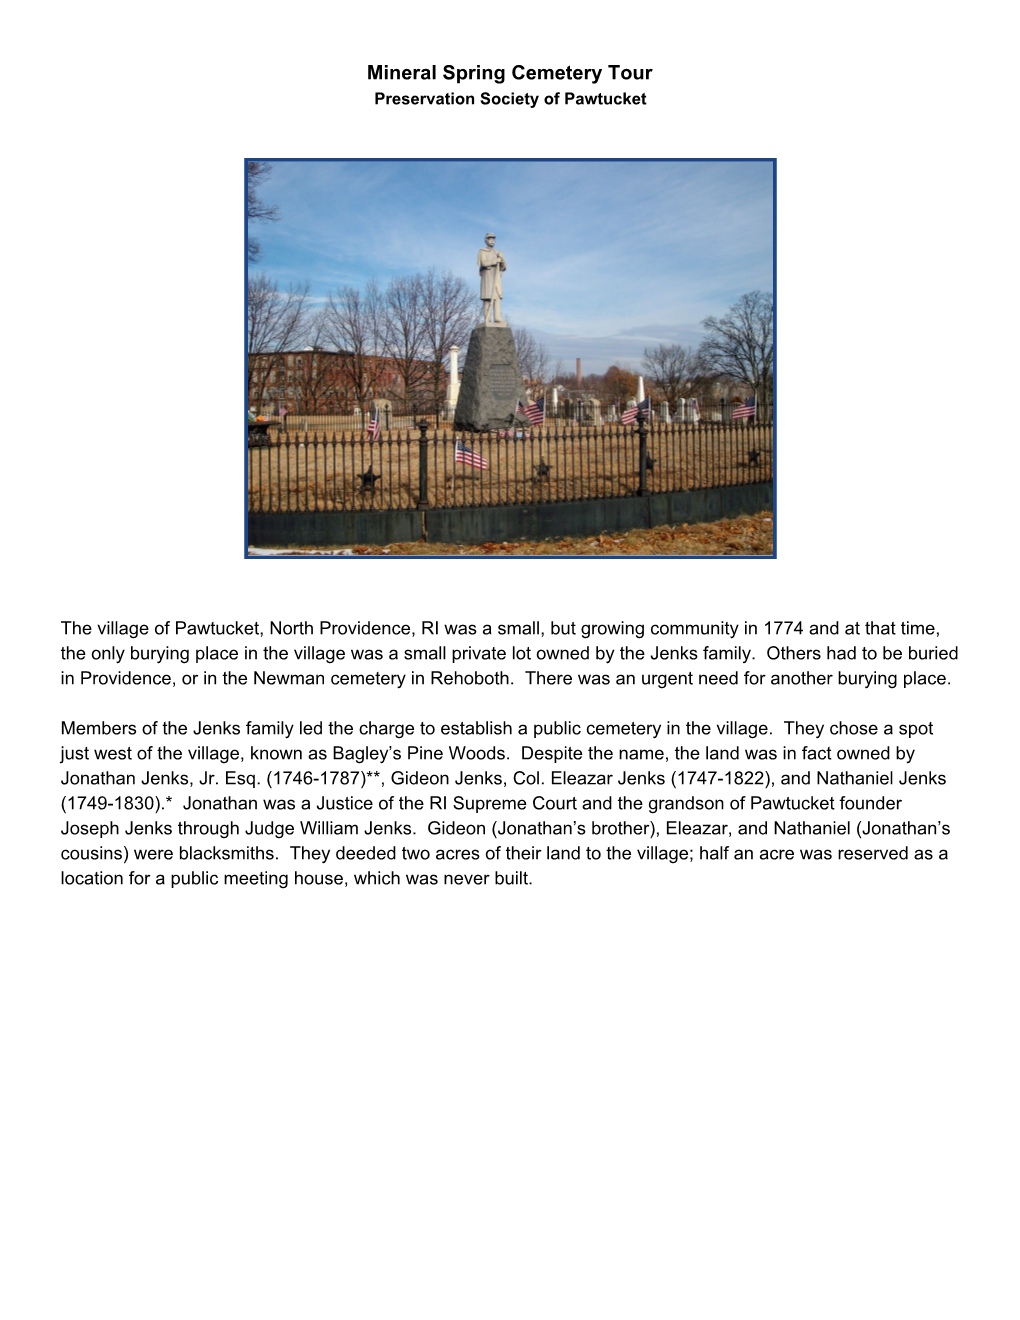 Mineral Spring Cemetery Tour Preservation Society of Pawtucket